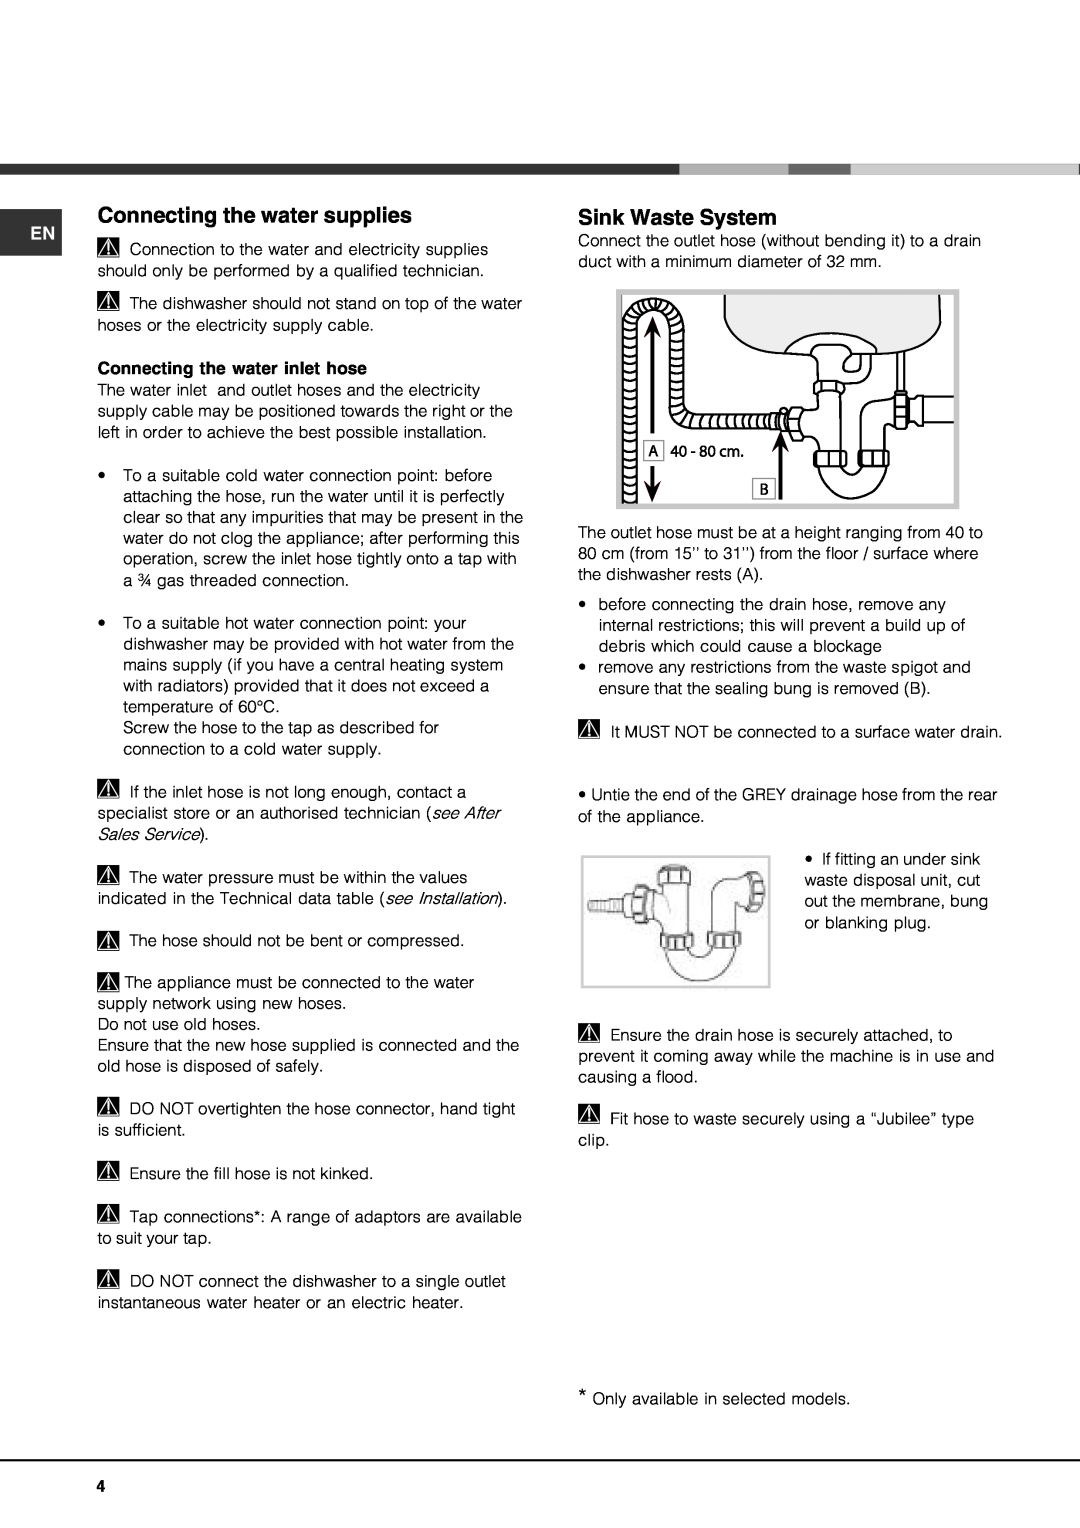 Hotpoint FDUD4212 manual Connecting the water supplies, Sink Waste System, Connecting the water inlet hose 